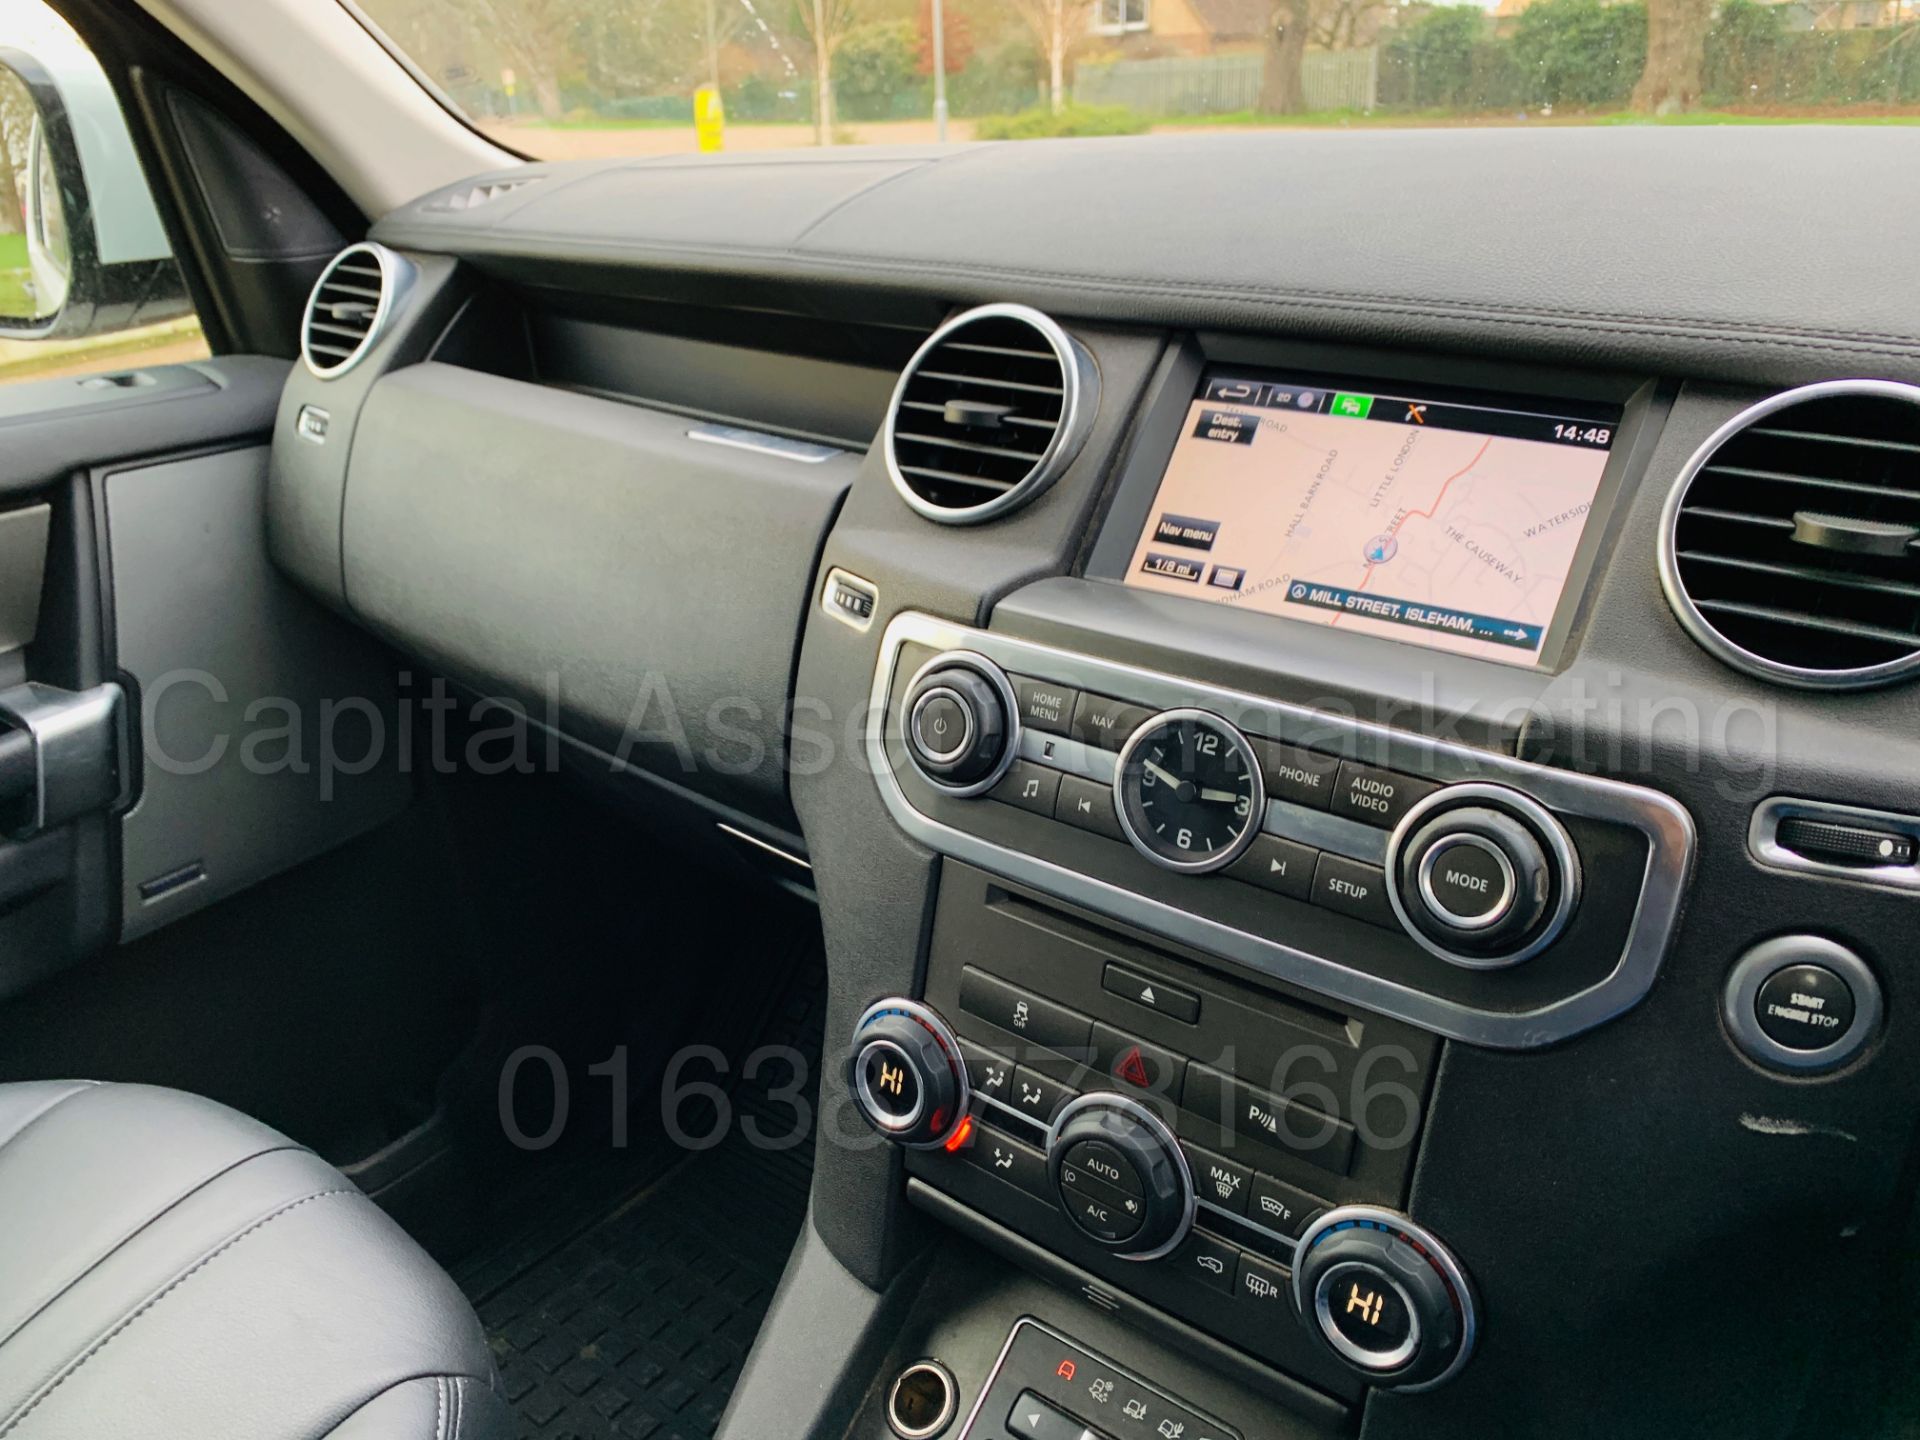 (ON SALE) LAND ROVER DISCOVERY 4 *XS EDITION* (2015) '3.0 SDV6 - 8 SPEED AUTO' *LEATHER & SAT NAV* - Image 42 of 52